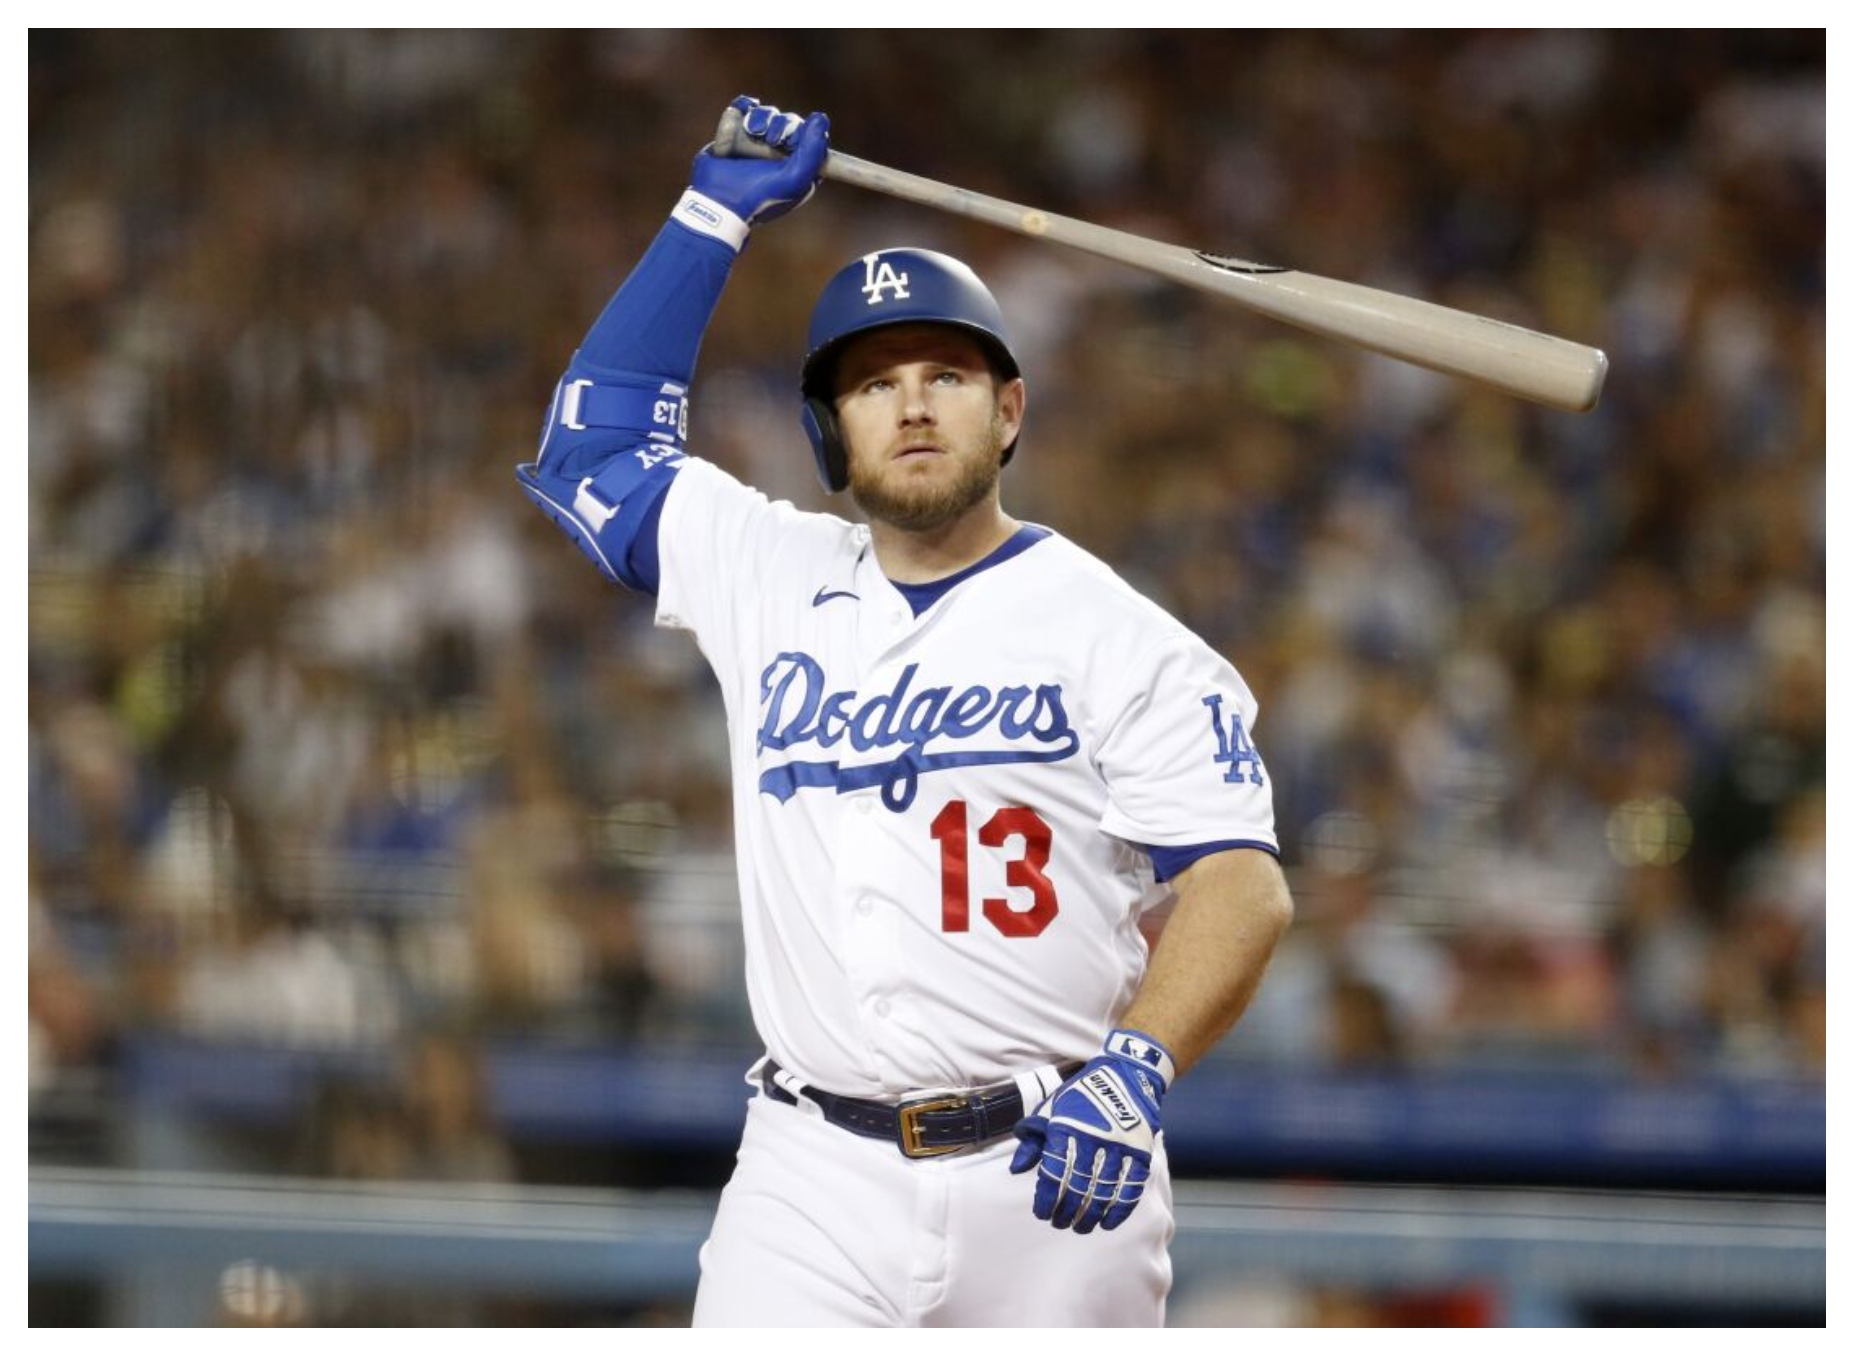 How many stolen bases does Max Muncy have? ABTC